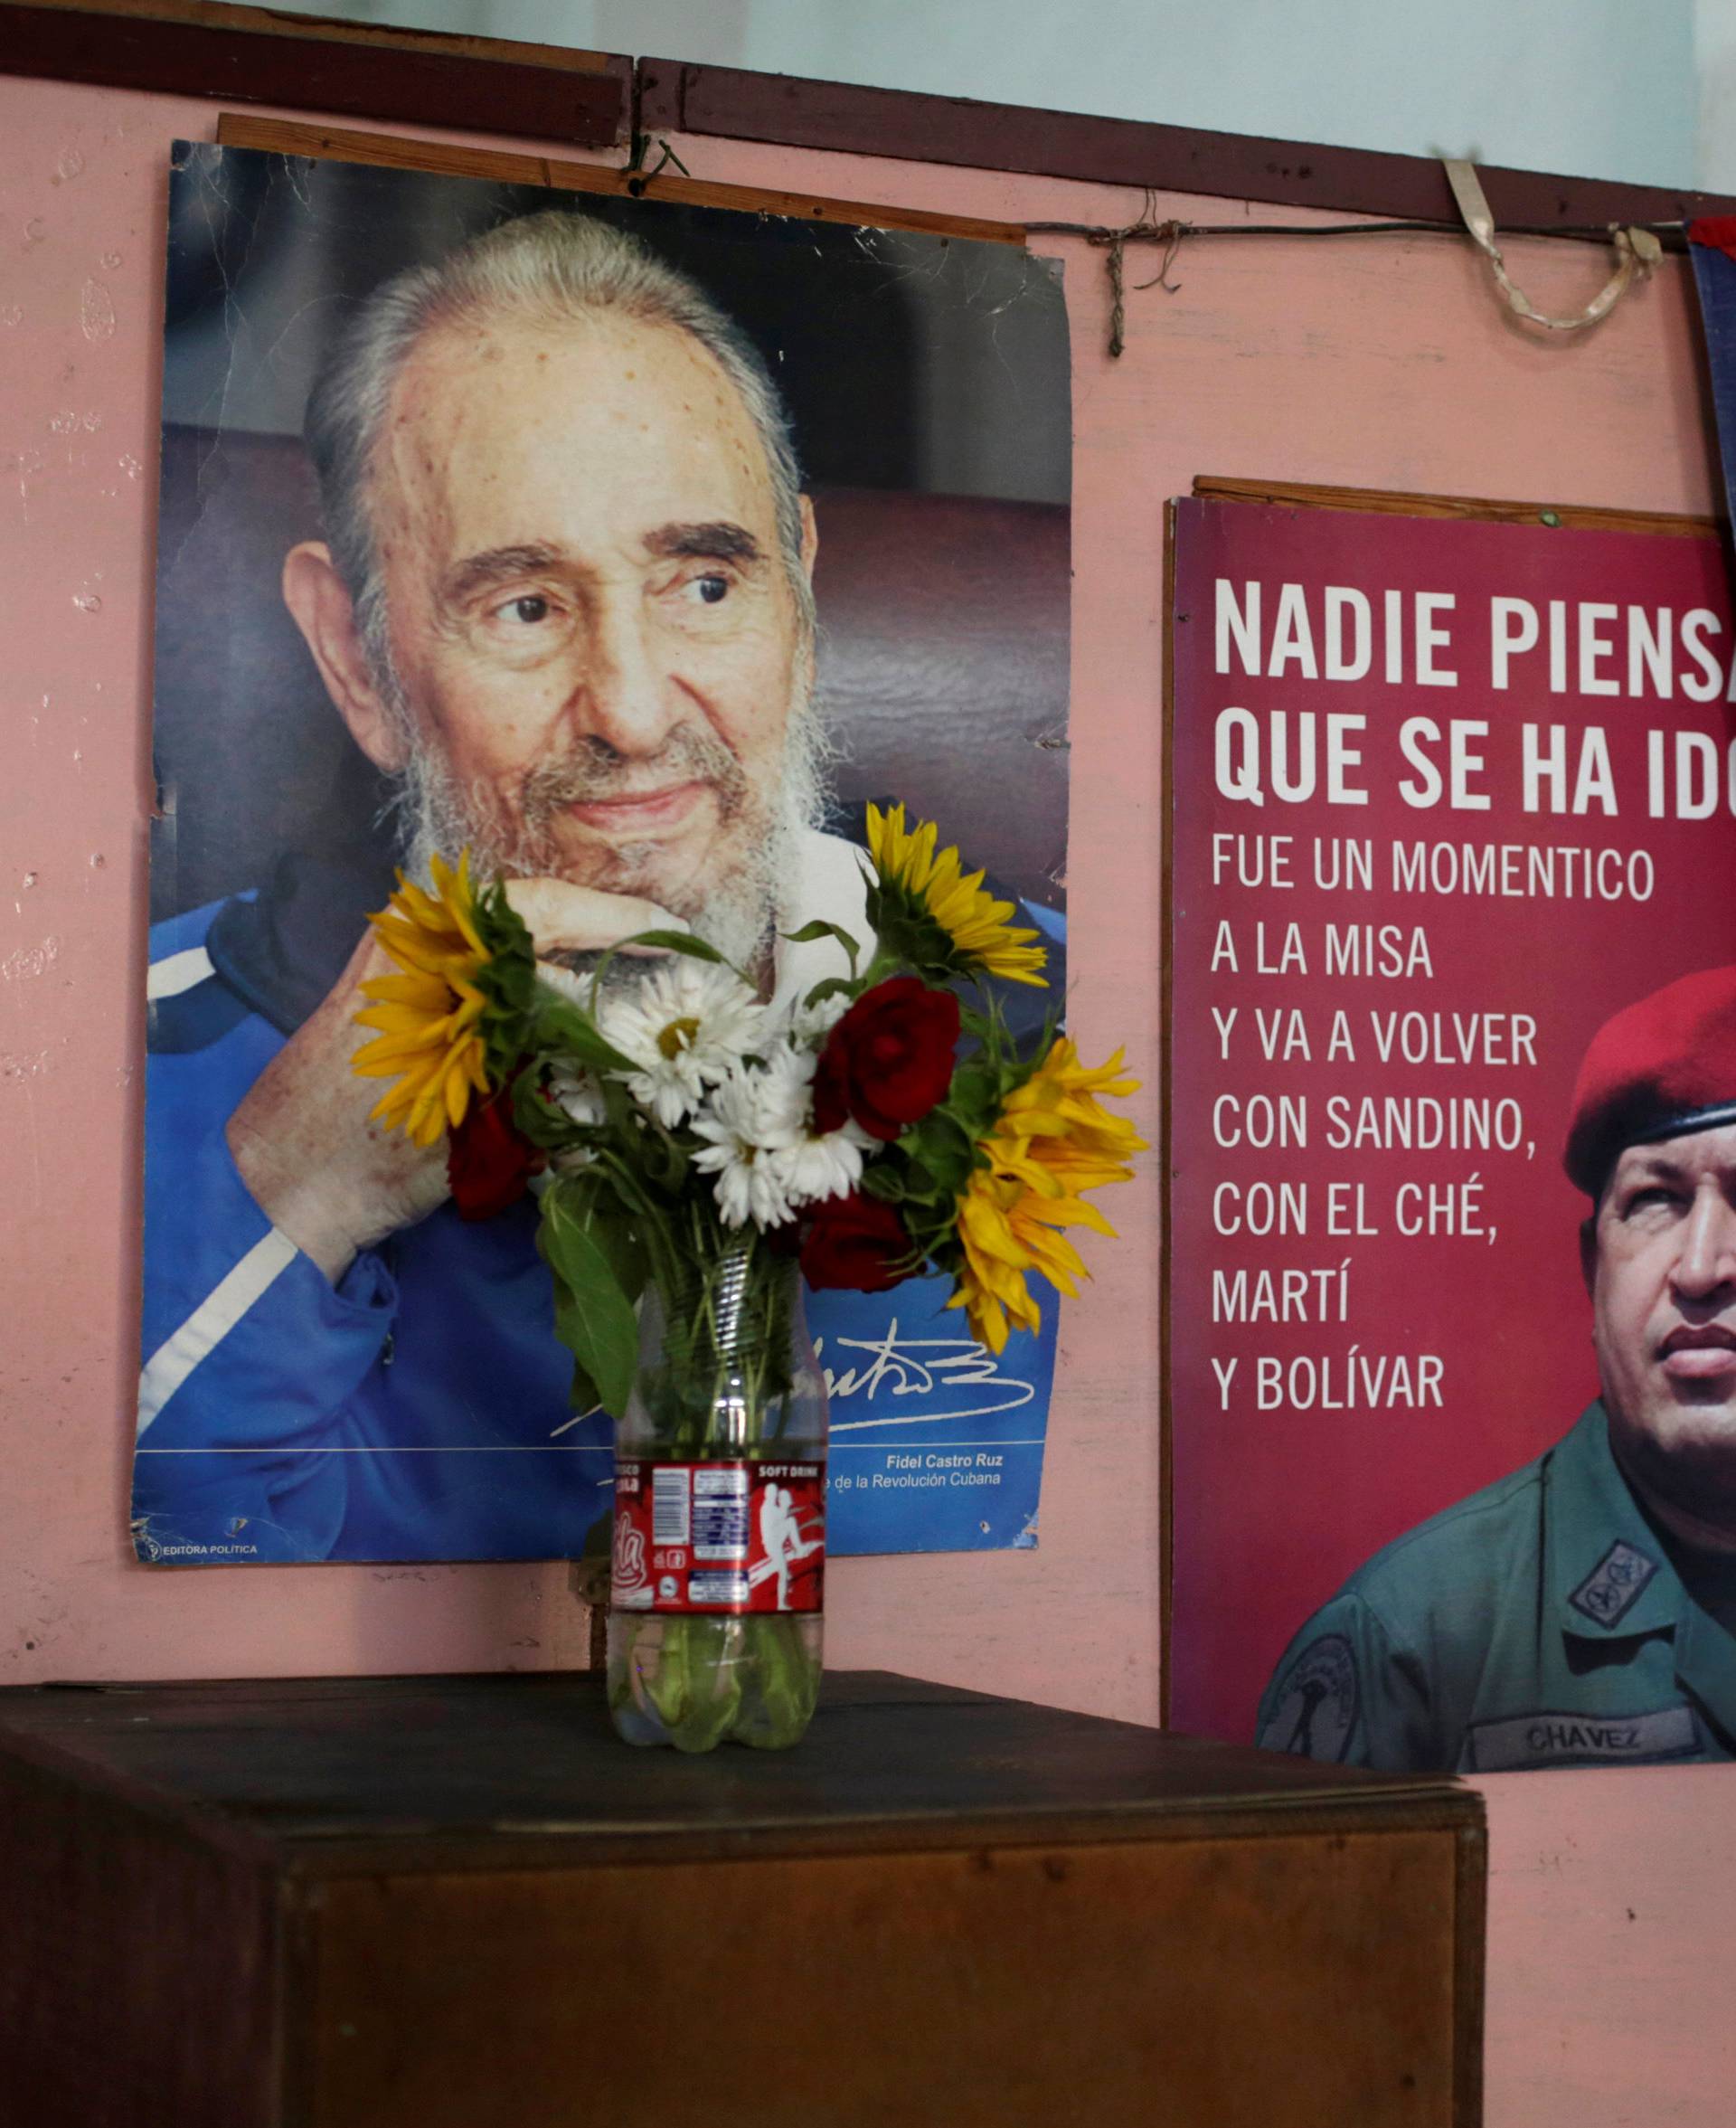 Pictures of Cuba's former president Fidel Castro and Venezuela's late president Hugo Chavez are seen on a wall near a Cuban flag inside a state office in Havana, Cuba